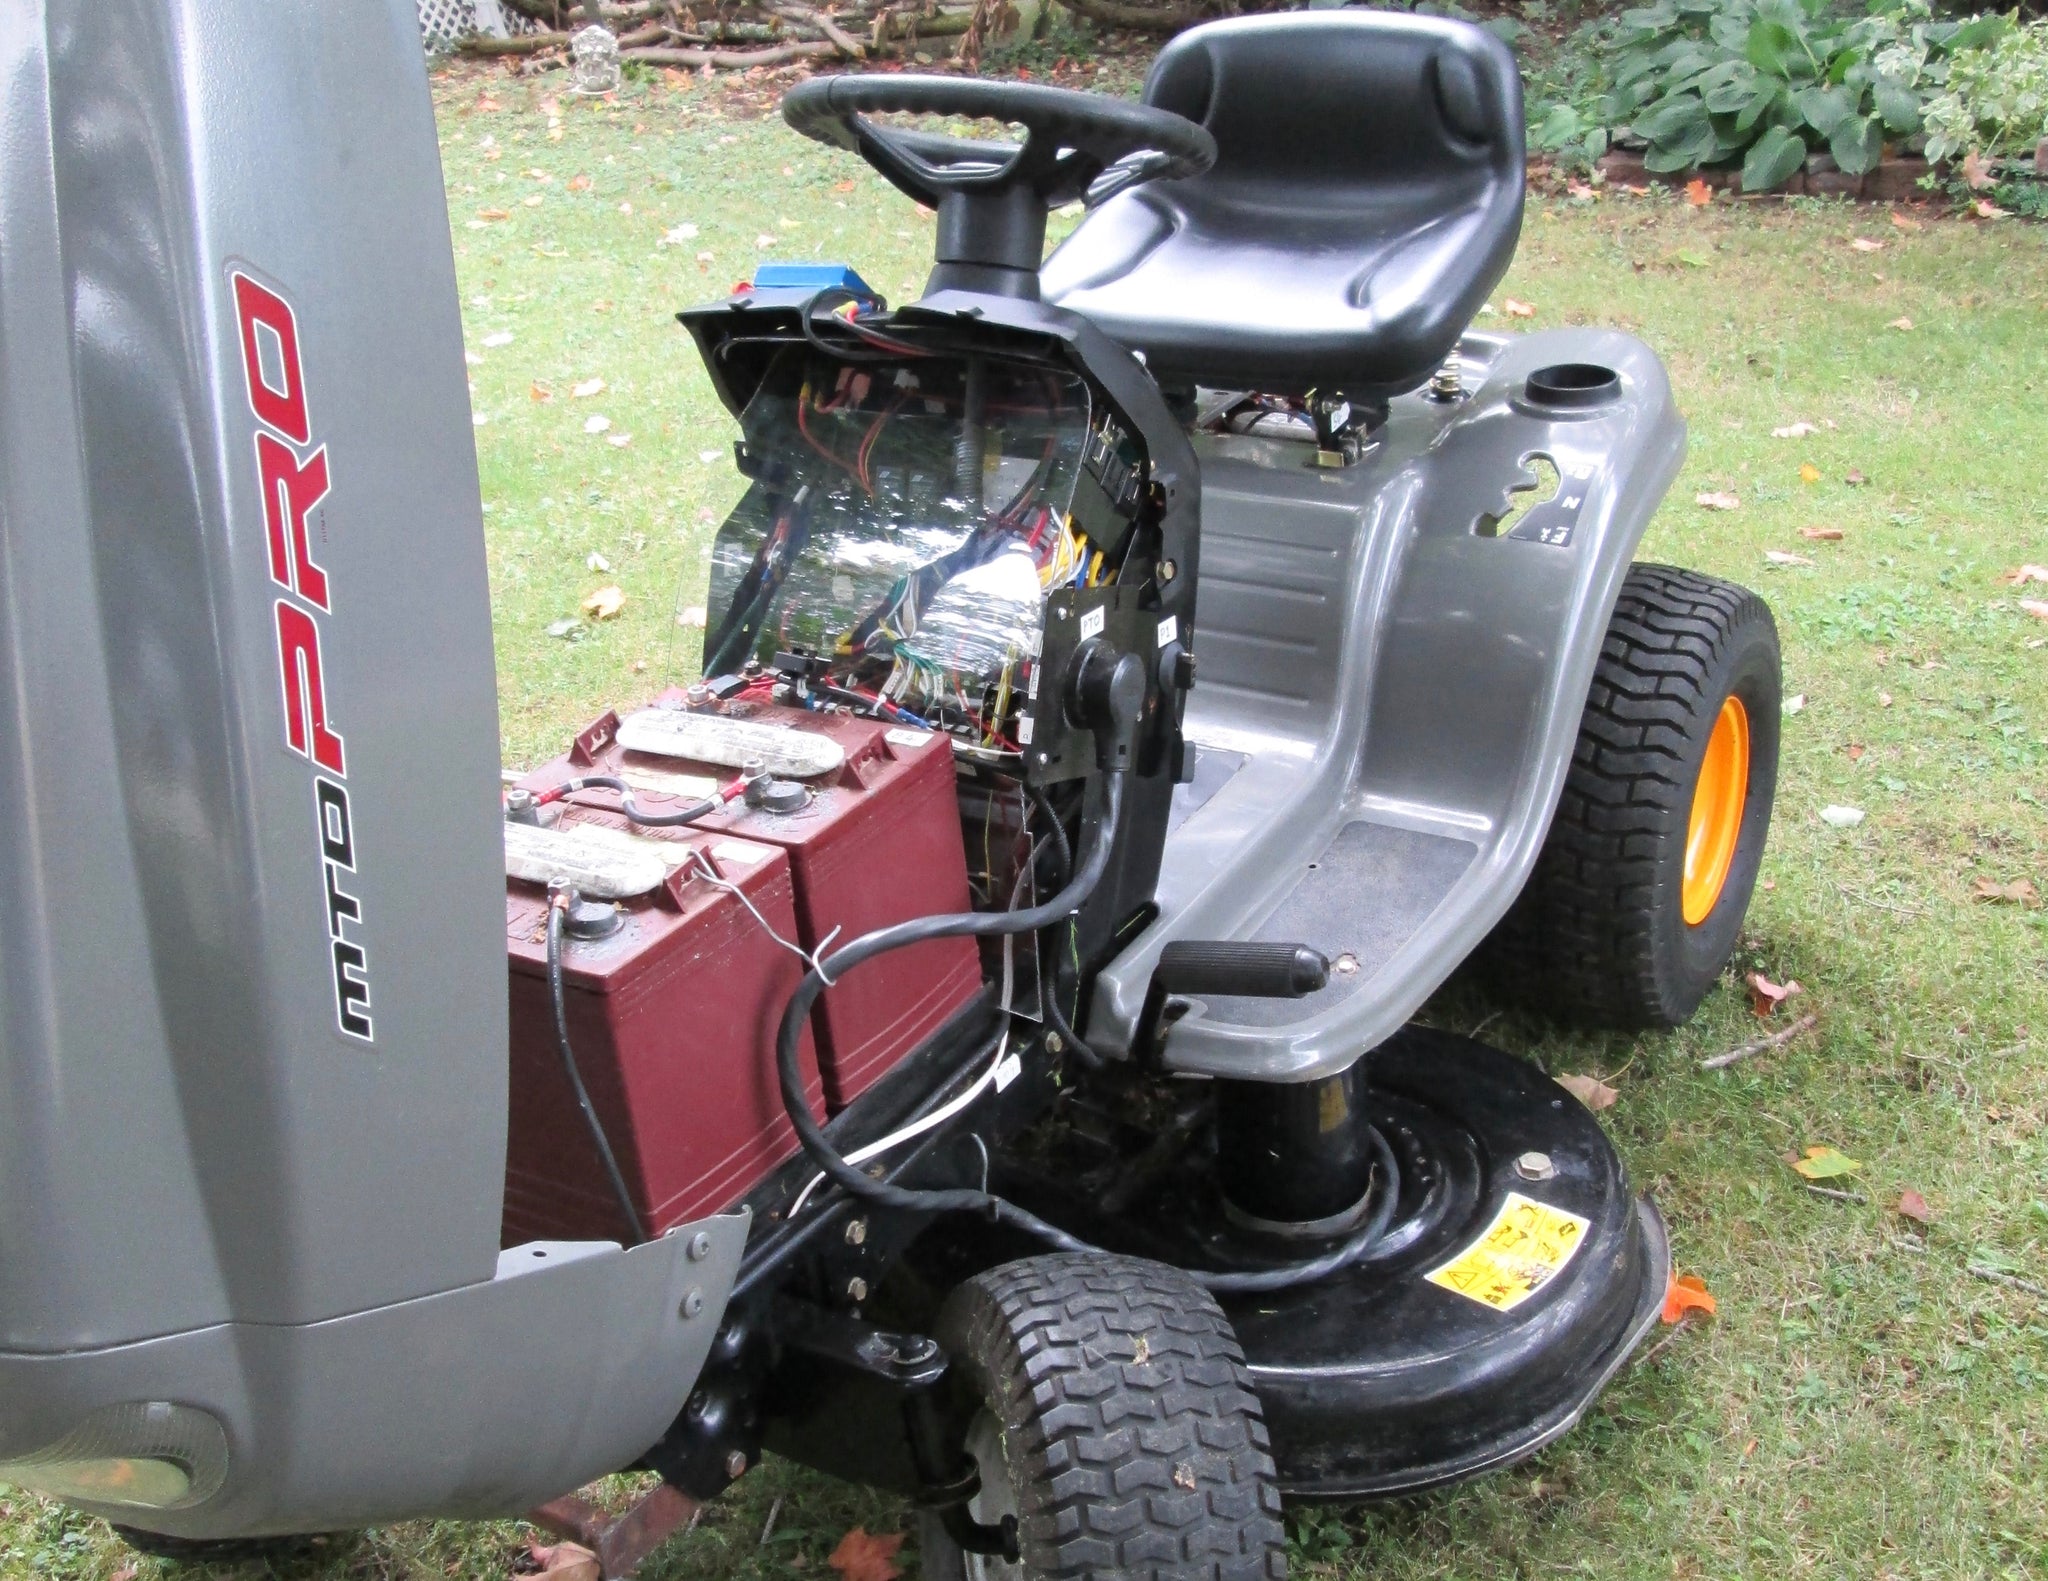 Convert your lawn tractor to clean quiet electric with Edmond's conversion kit clean battery power